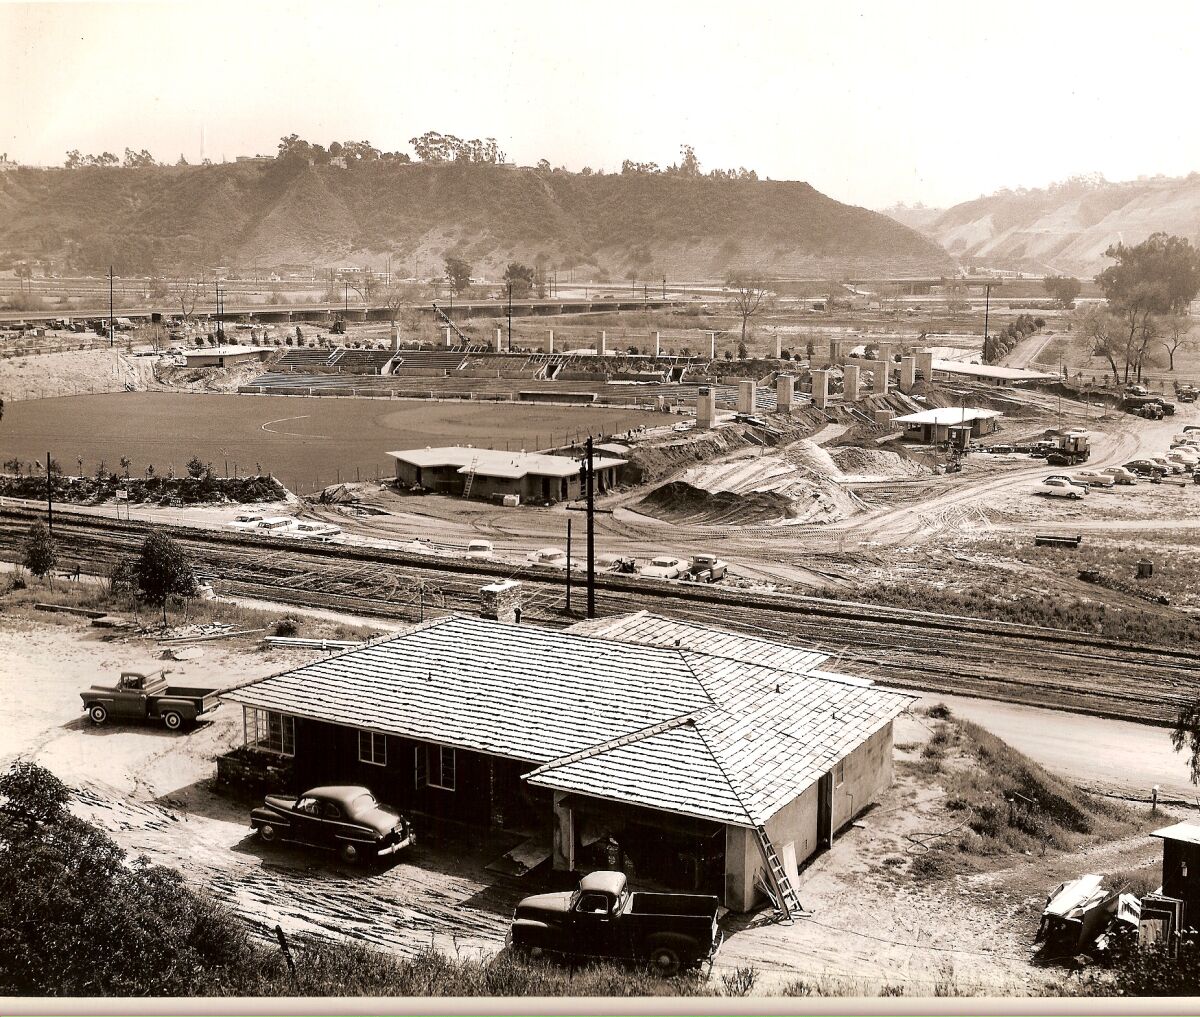 Westgate Park is pictured under construction in Mission Valley in early 1958. Friars Road is in the foreground.